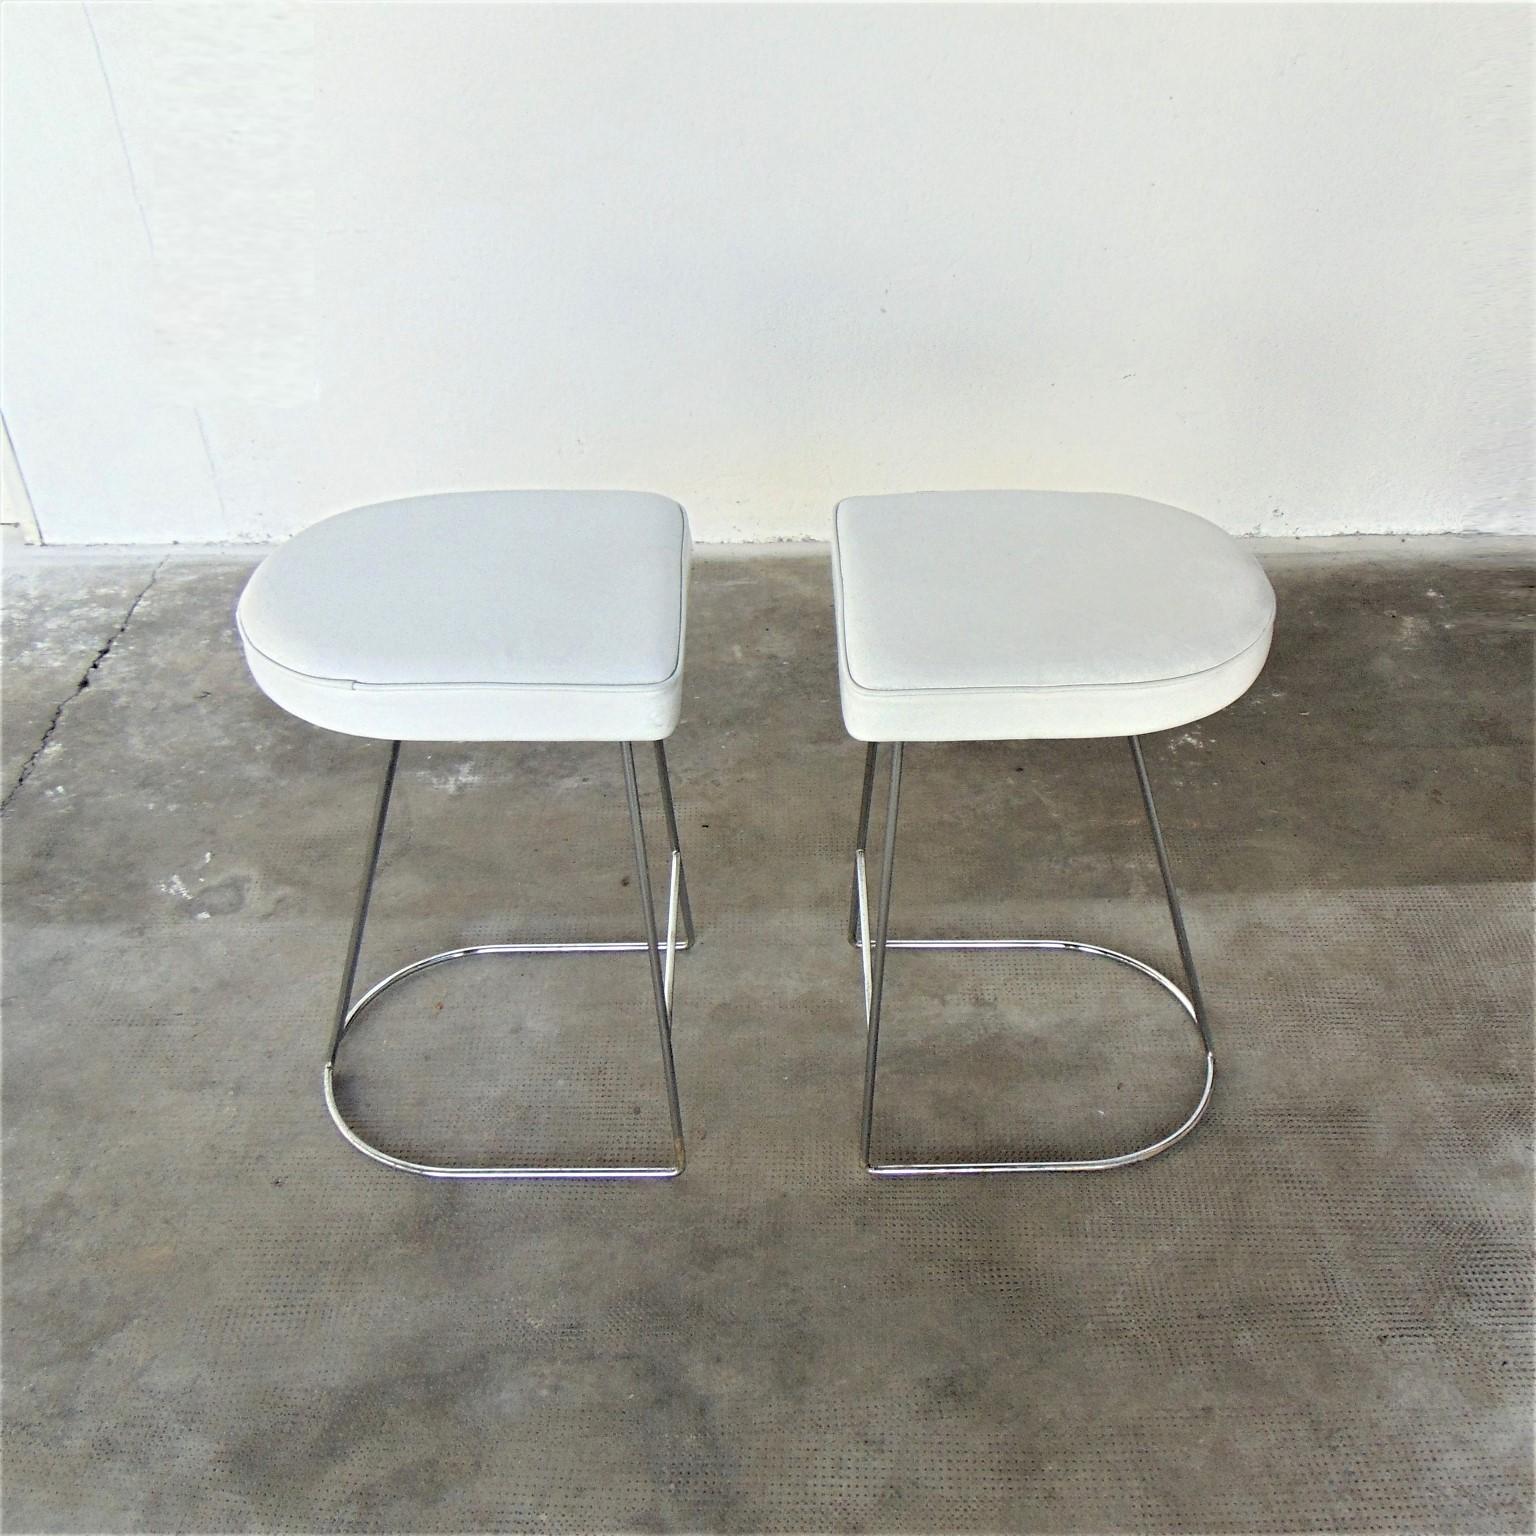 1983 Barstools Set White Leather and Chromed Steel by Sormani, Italy In Good Condition For Sale In Arosio, IT